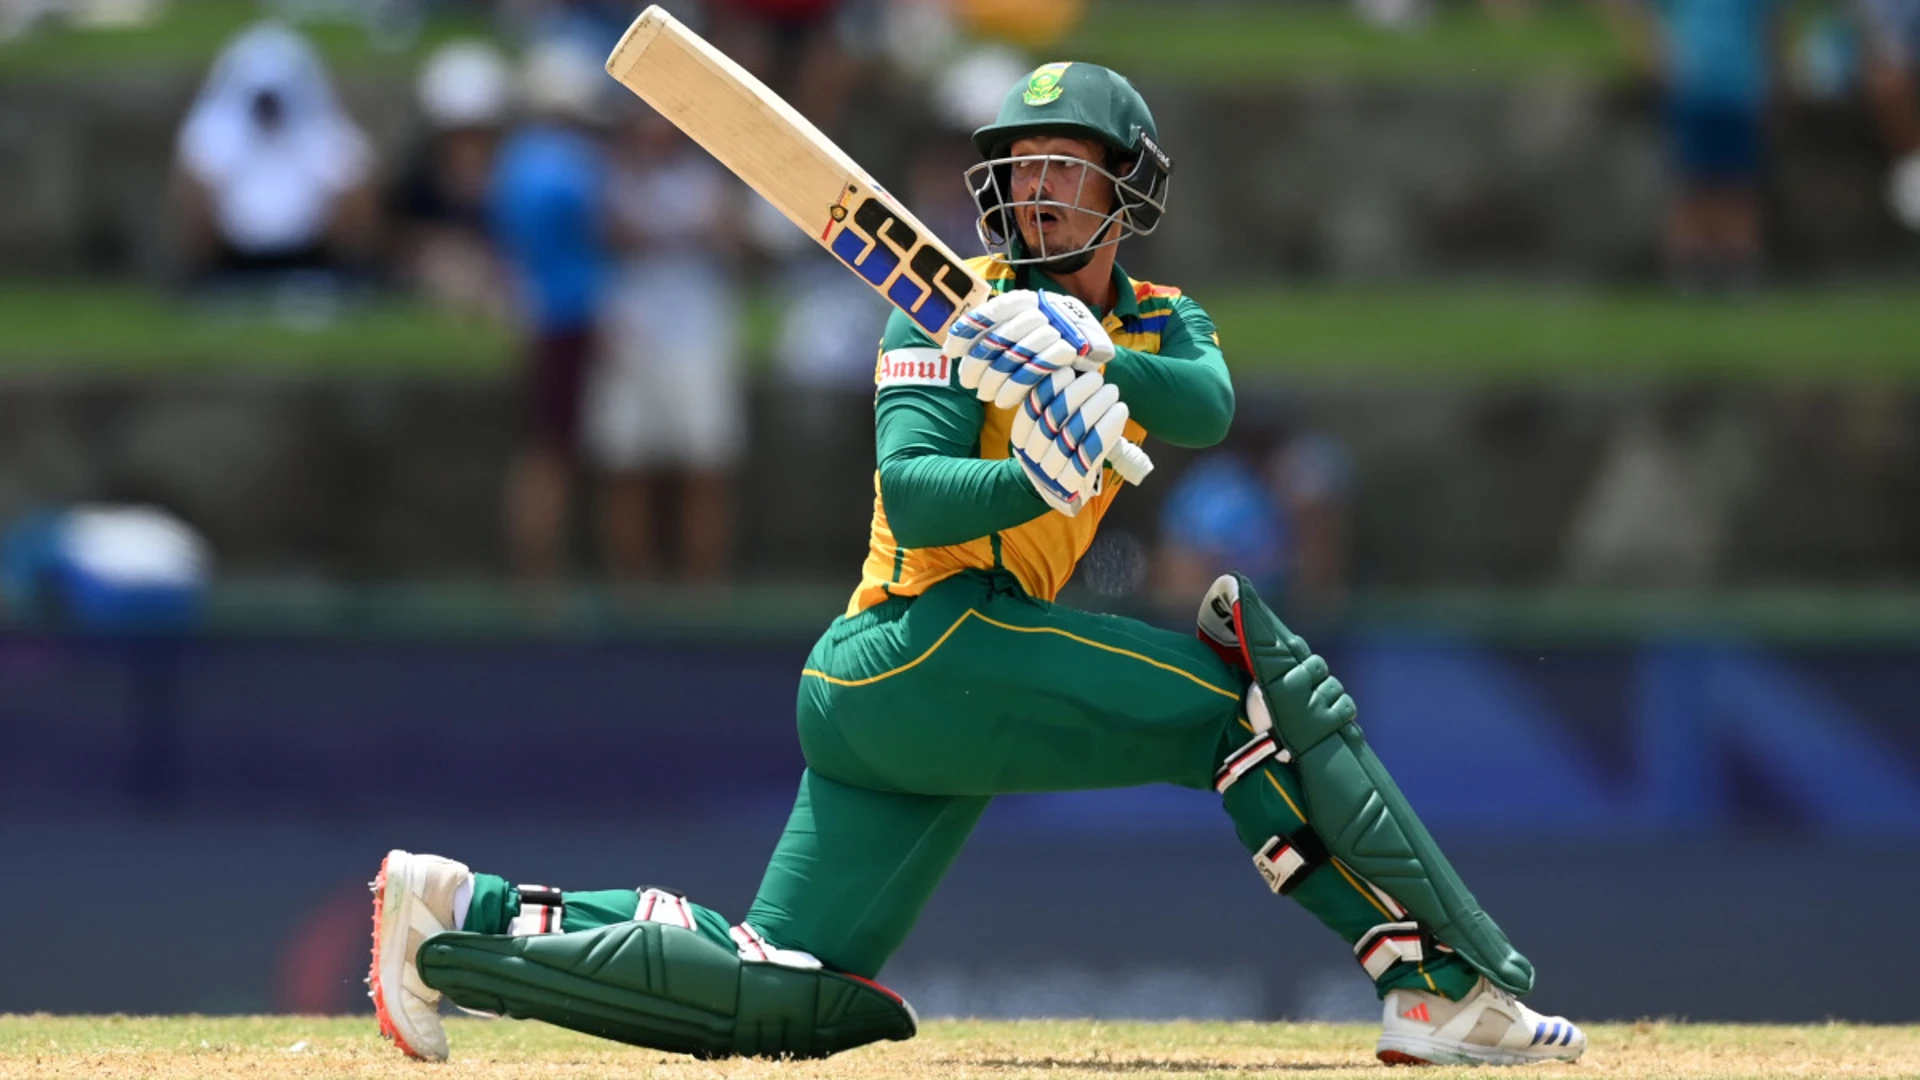 More relief than celebration for SA vs USA after 18-run win